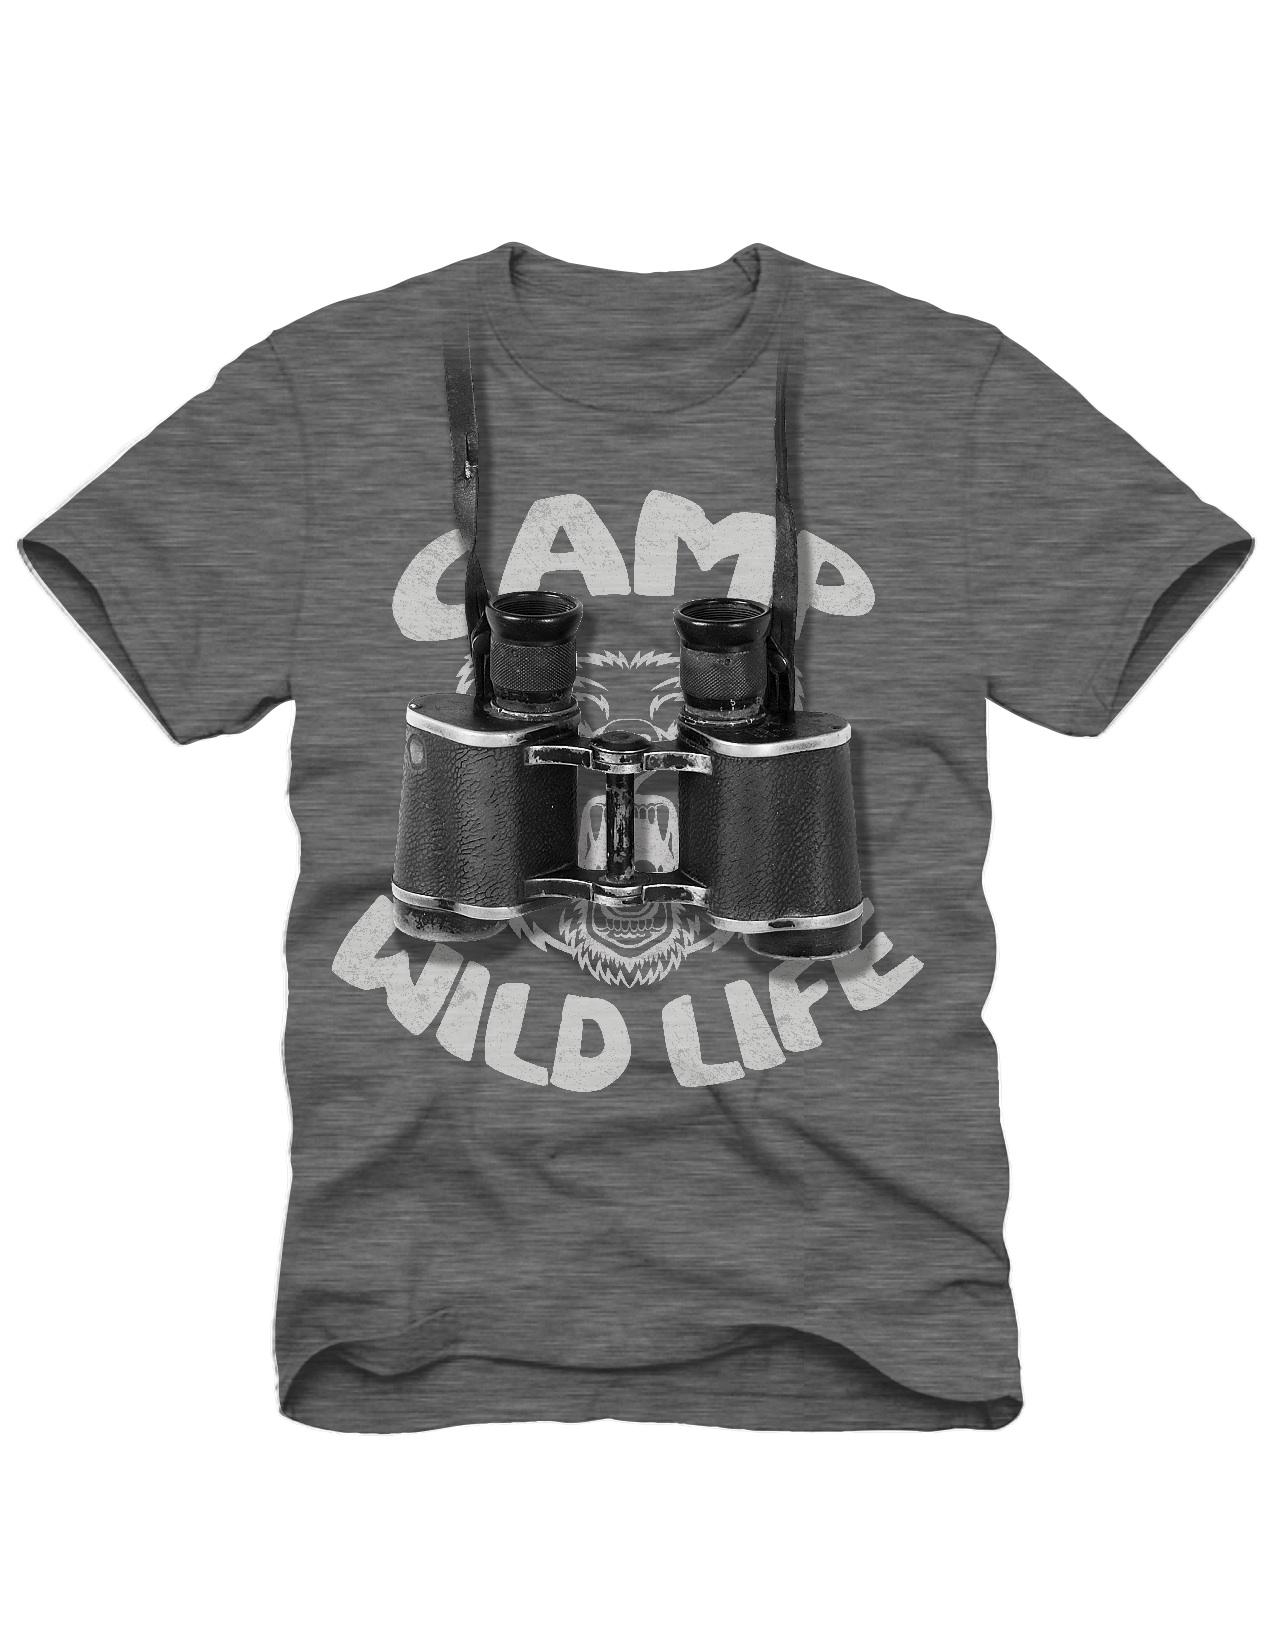 Route 66 Boy's Graphic T-Shirt - Camp Wild Life